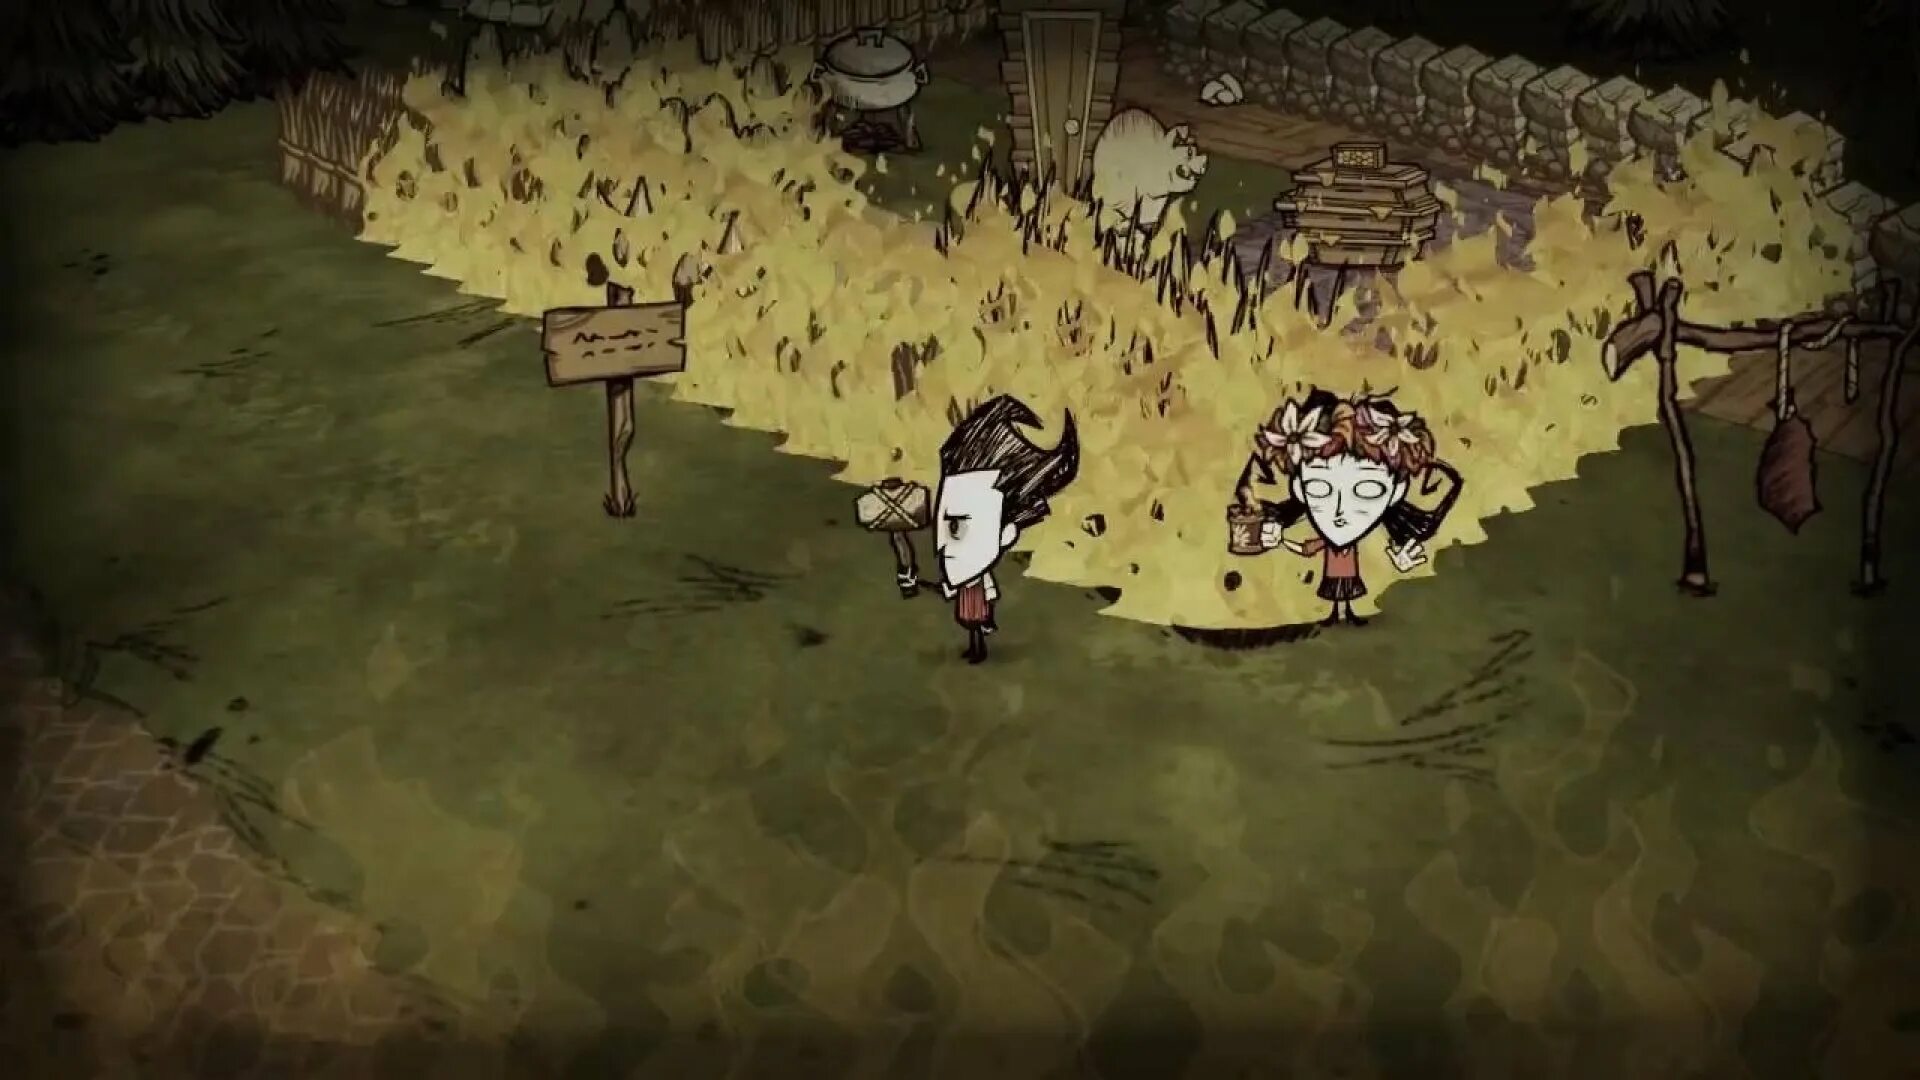 Don t starve gaming. Don't Starve together. Don t Starve игра. Донт старв тугезер. Don't Starve джунгли.